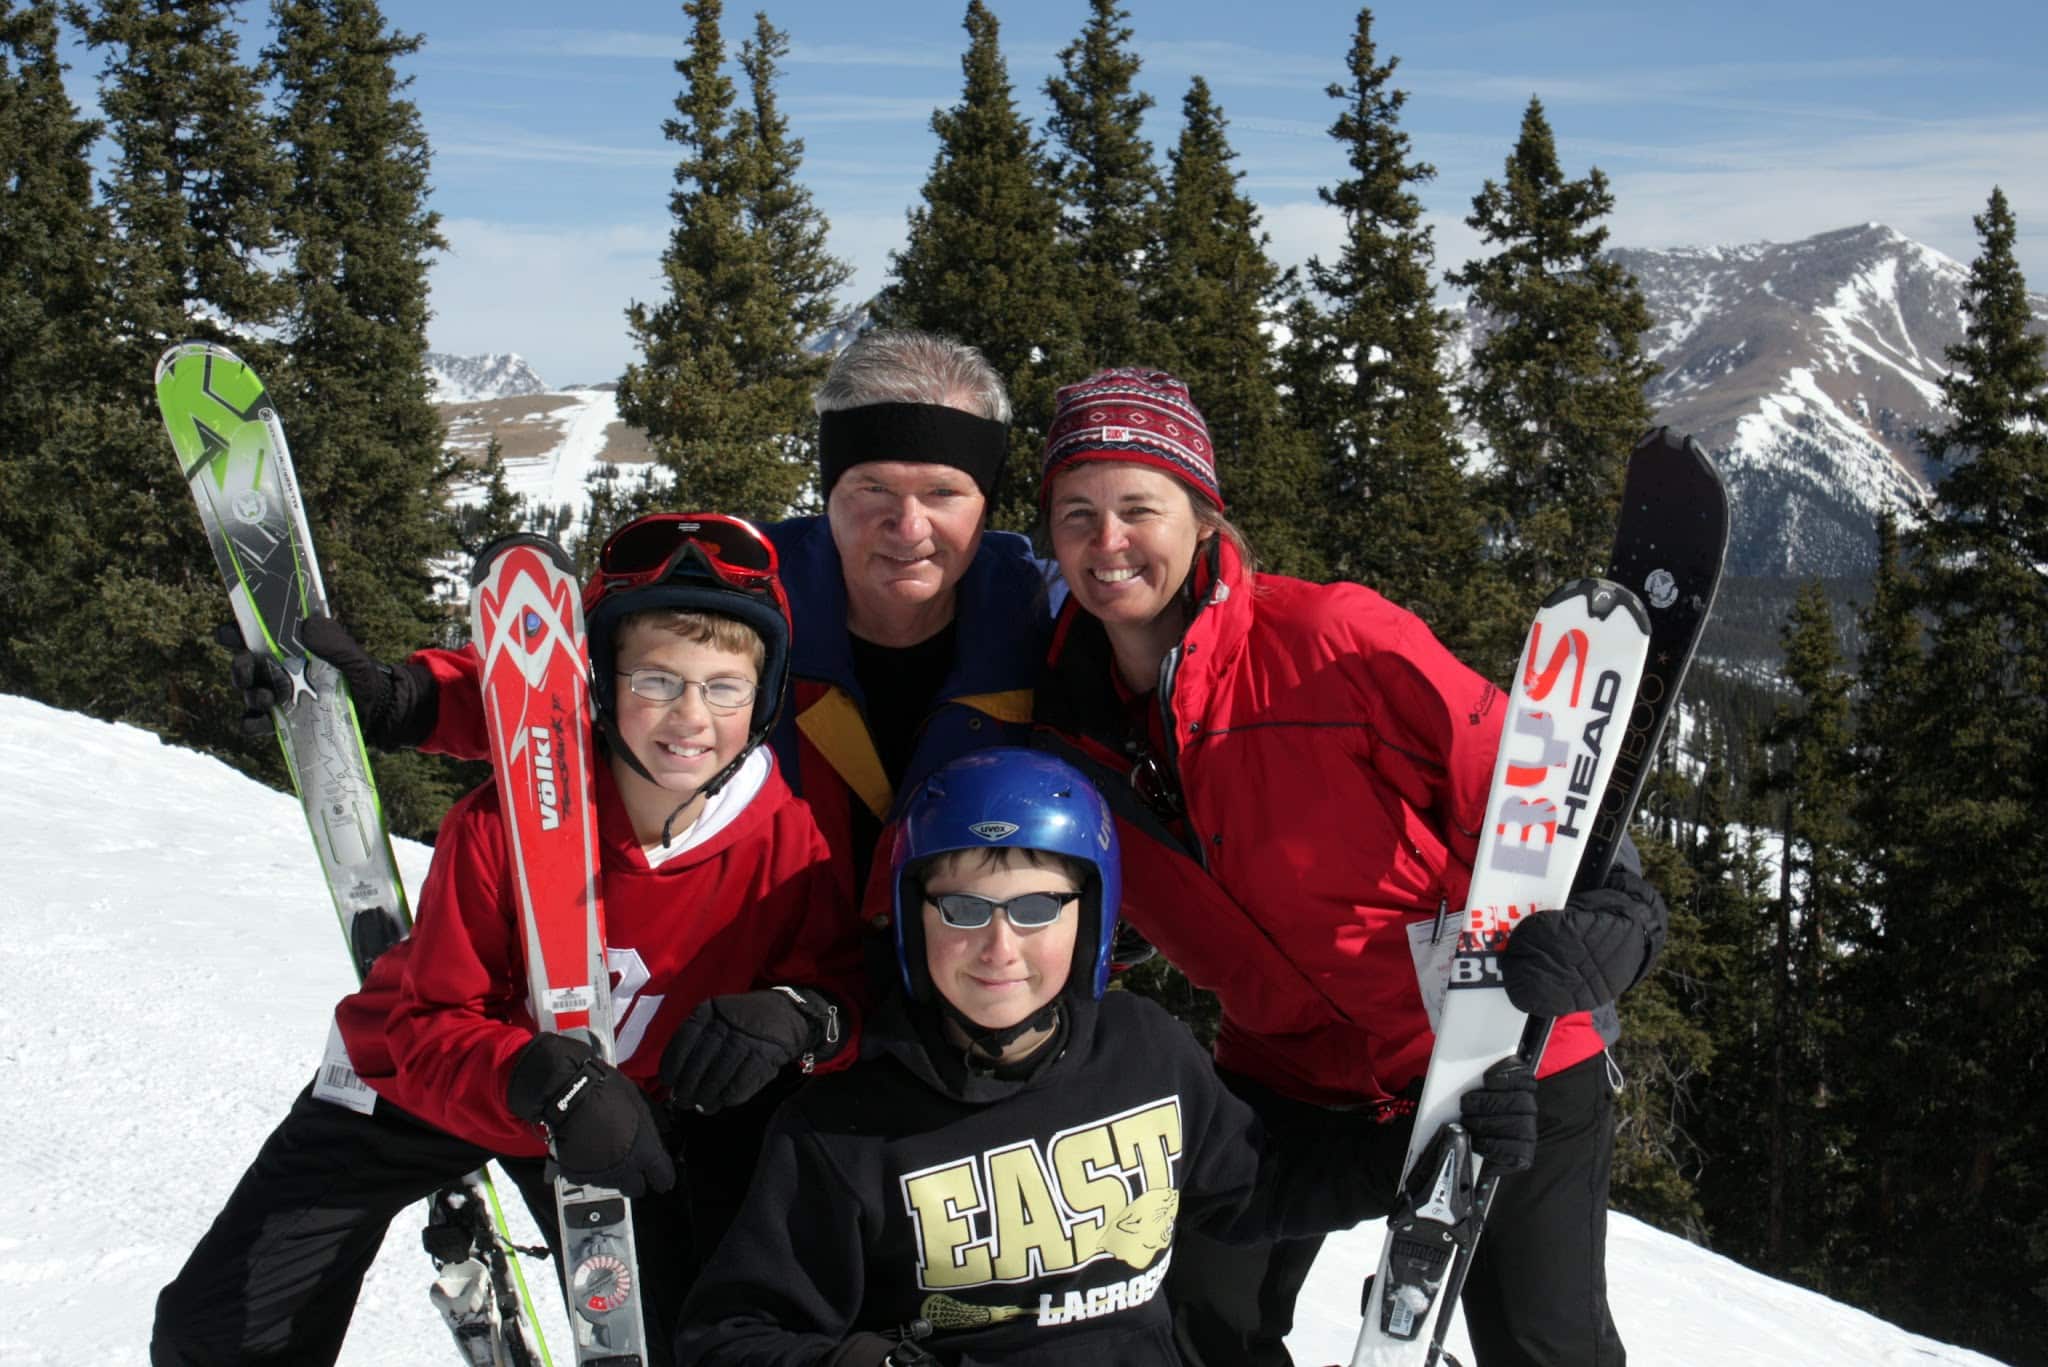 Family of 4 taking a picture with skis on a ski mountain.